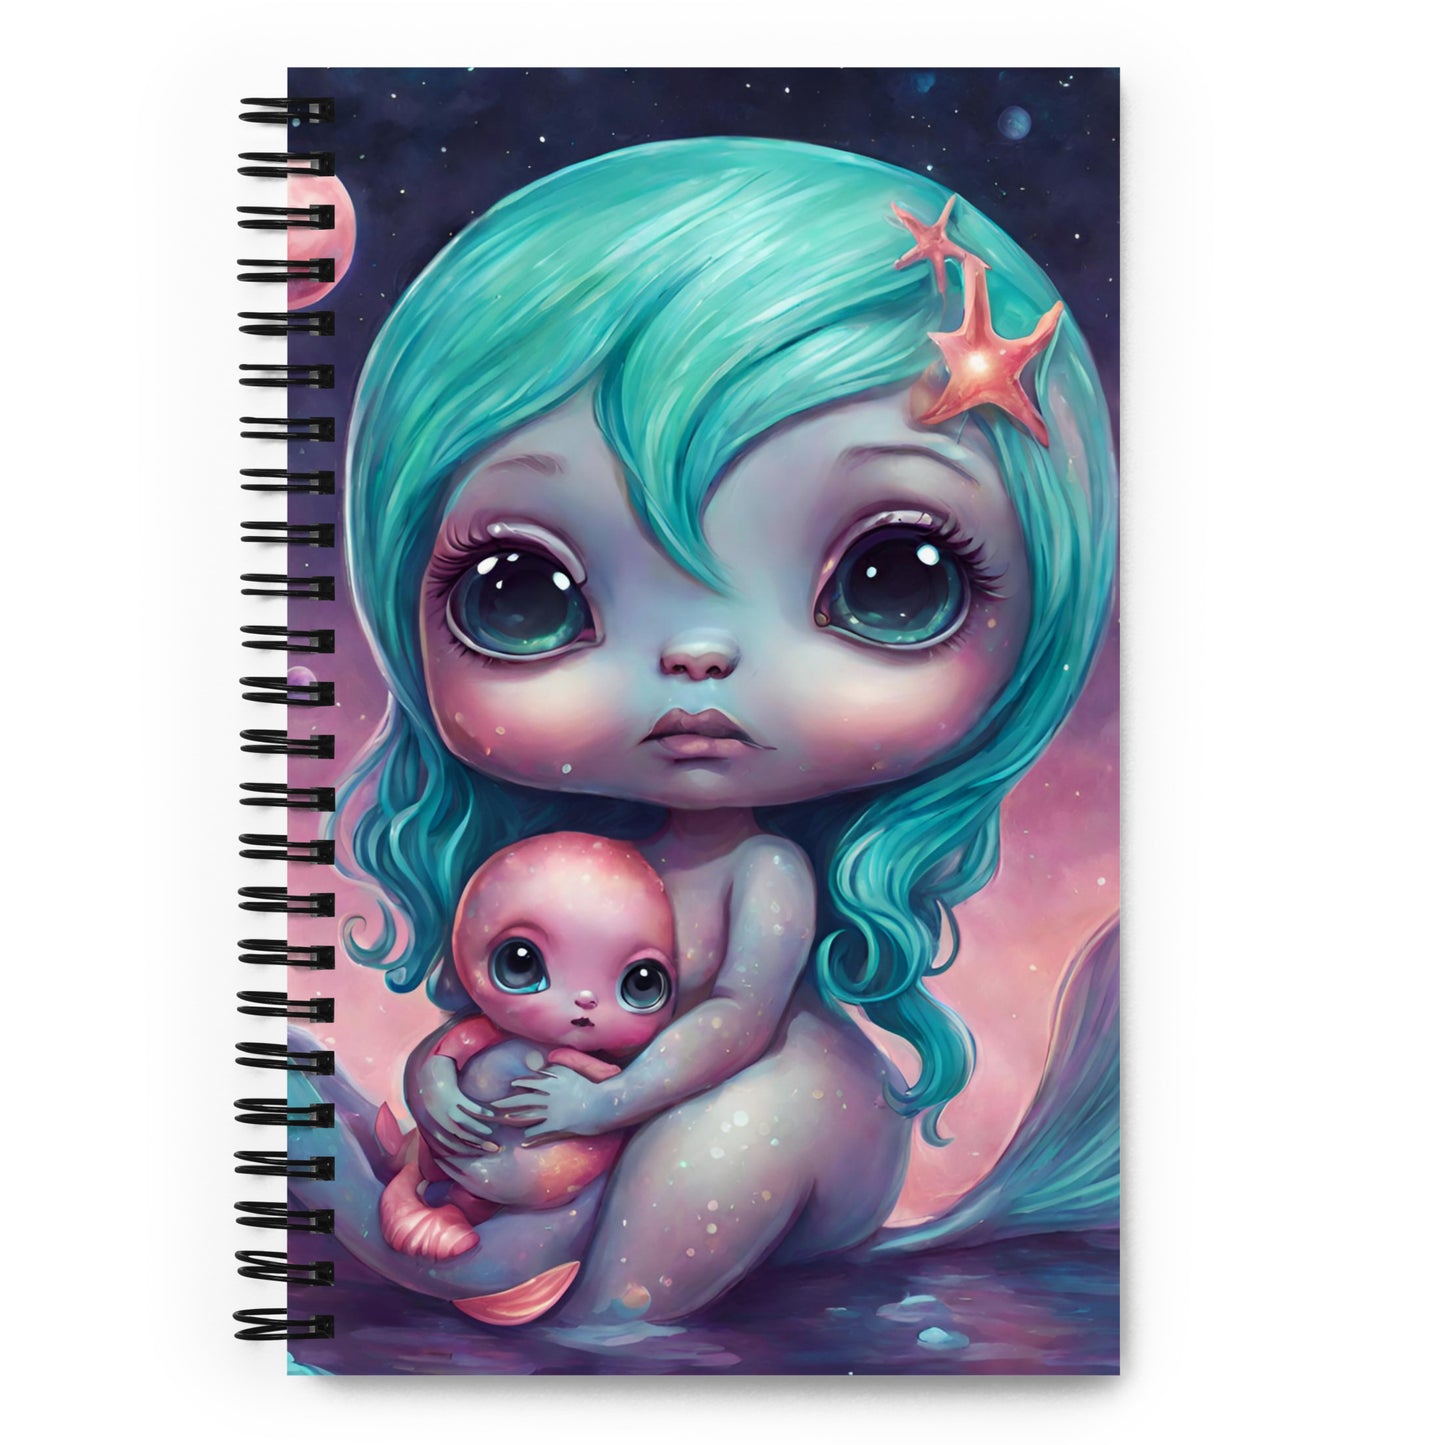 "Everything for You" Spiral Notebook